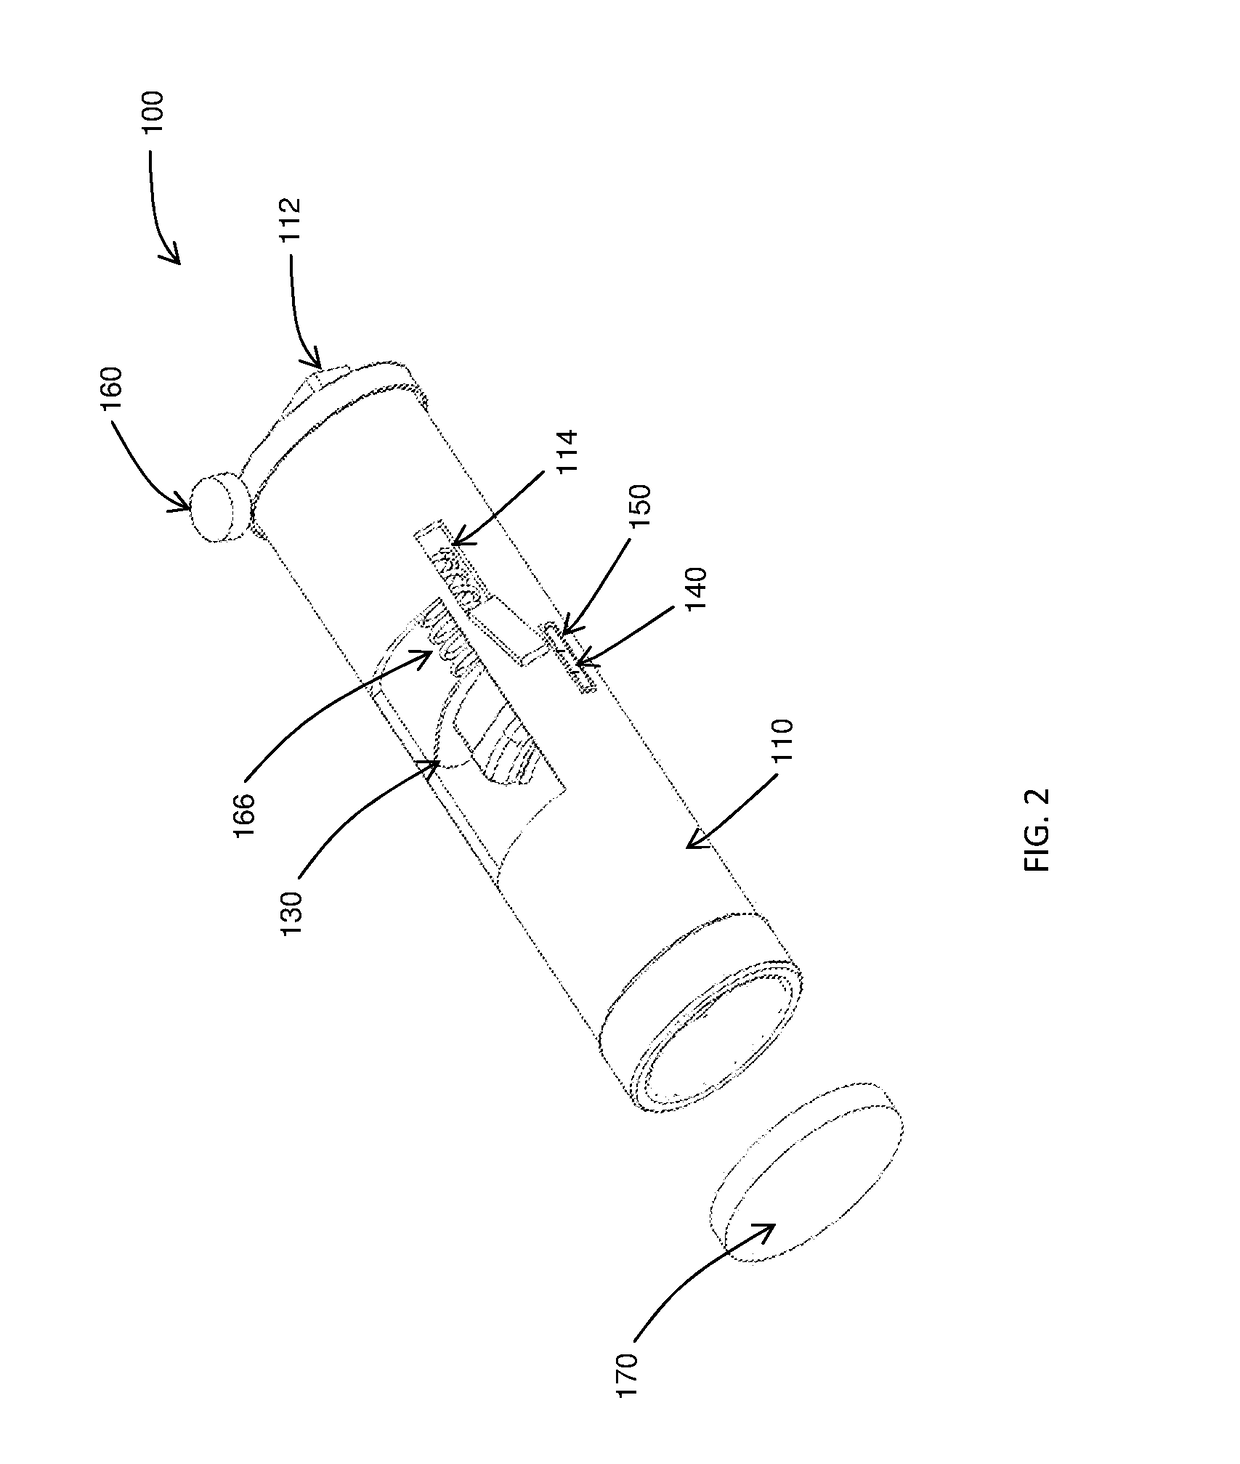 Electronic nail clipper device and method